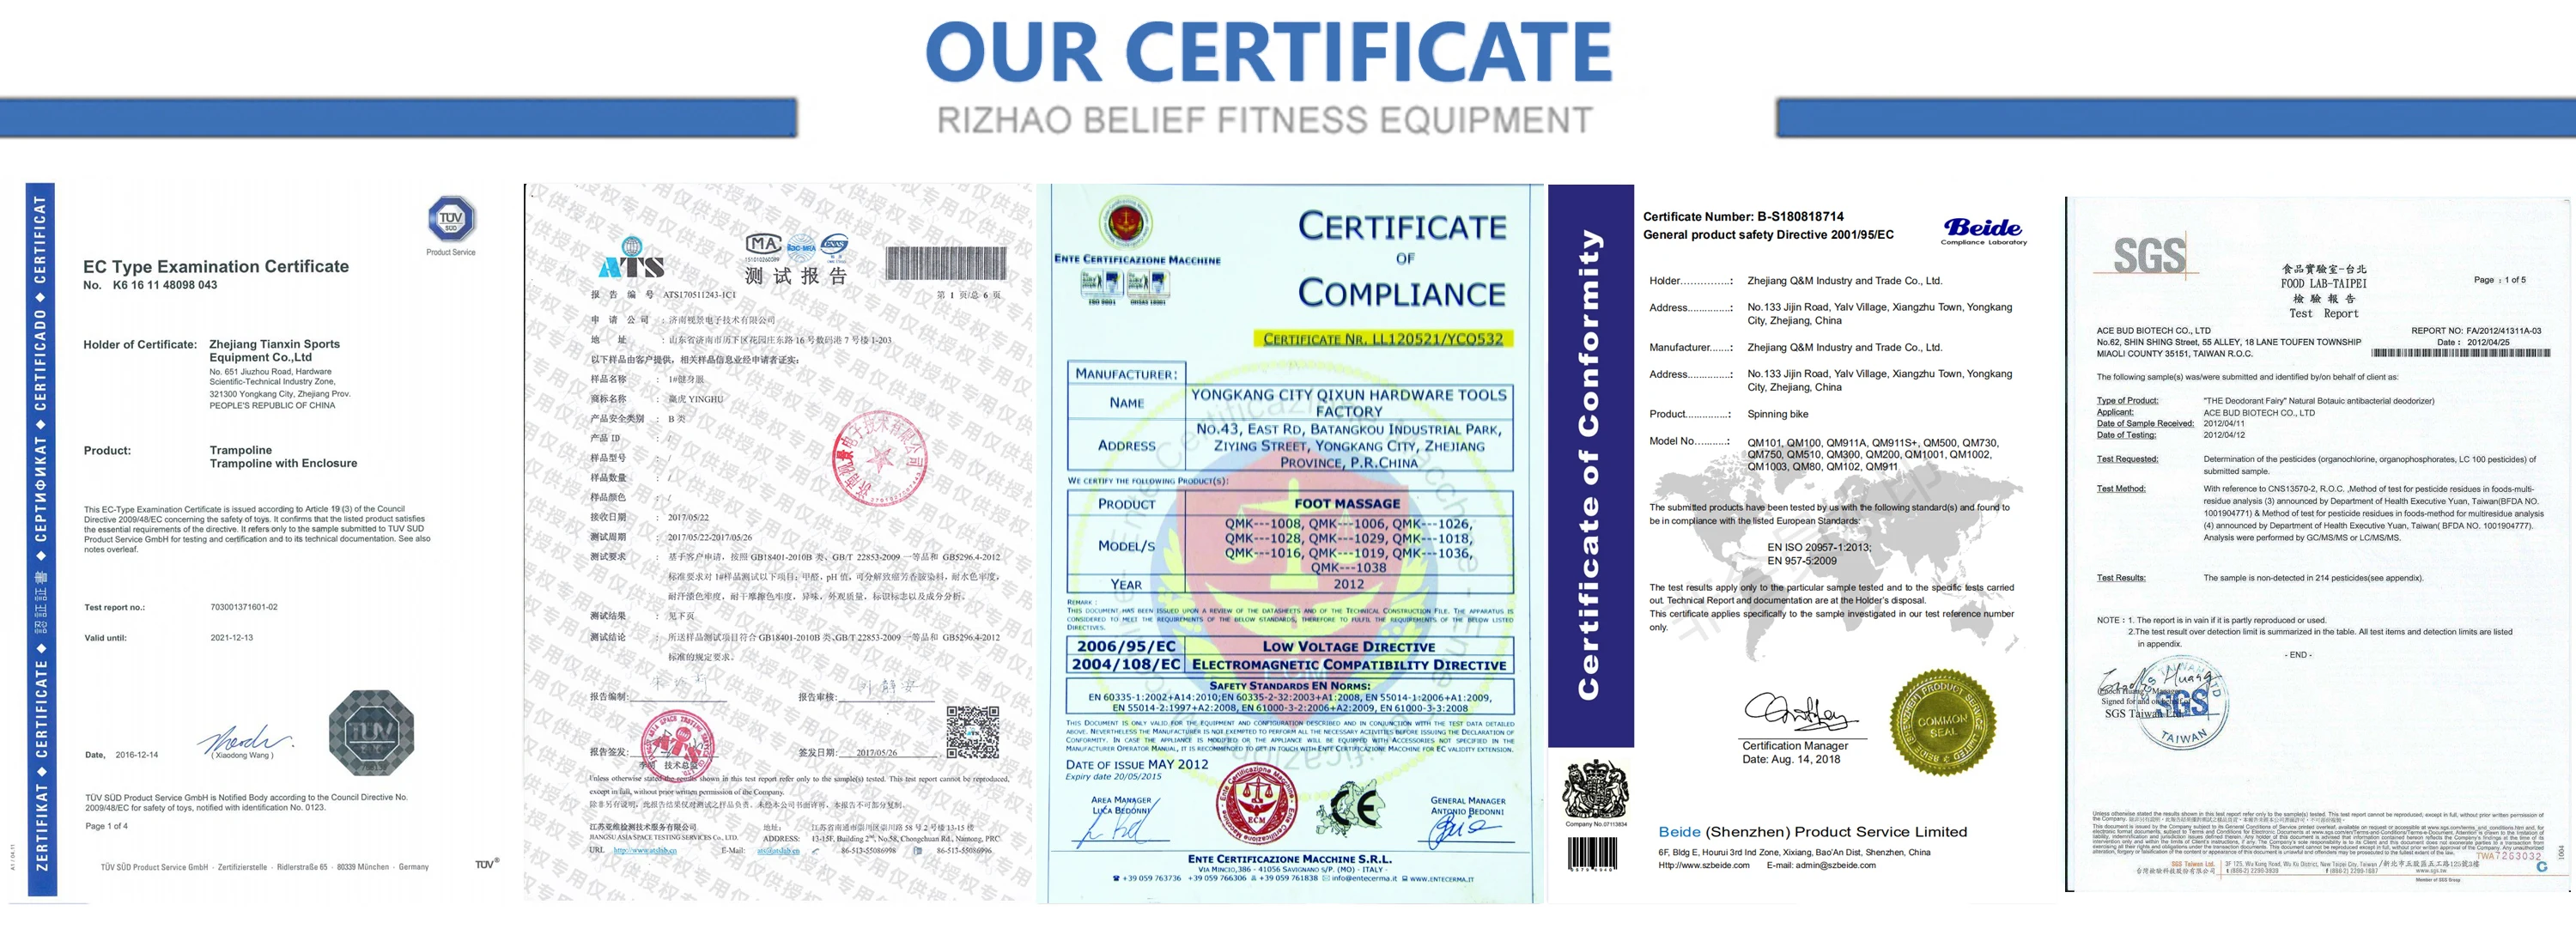 4.our certificate